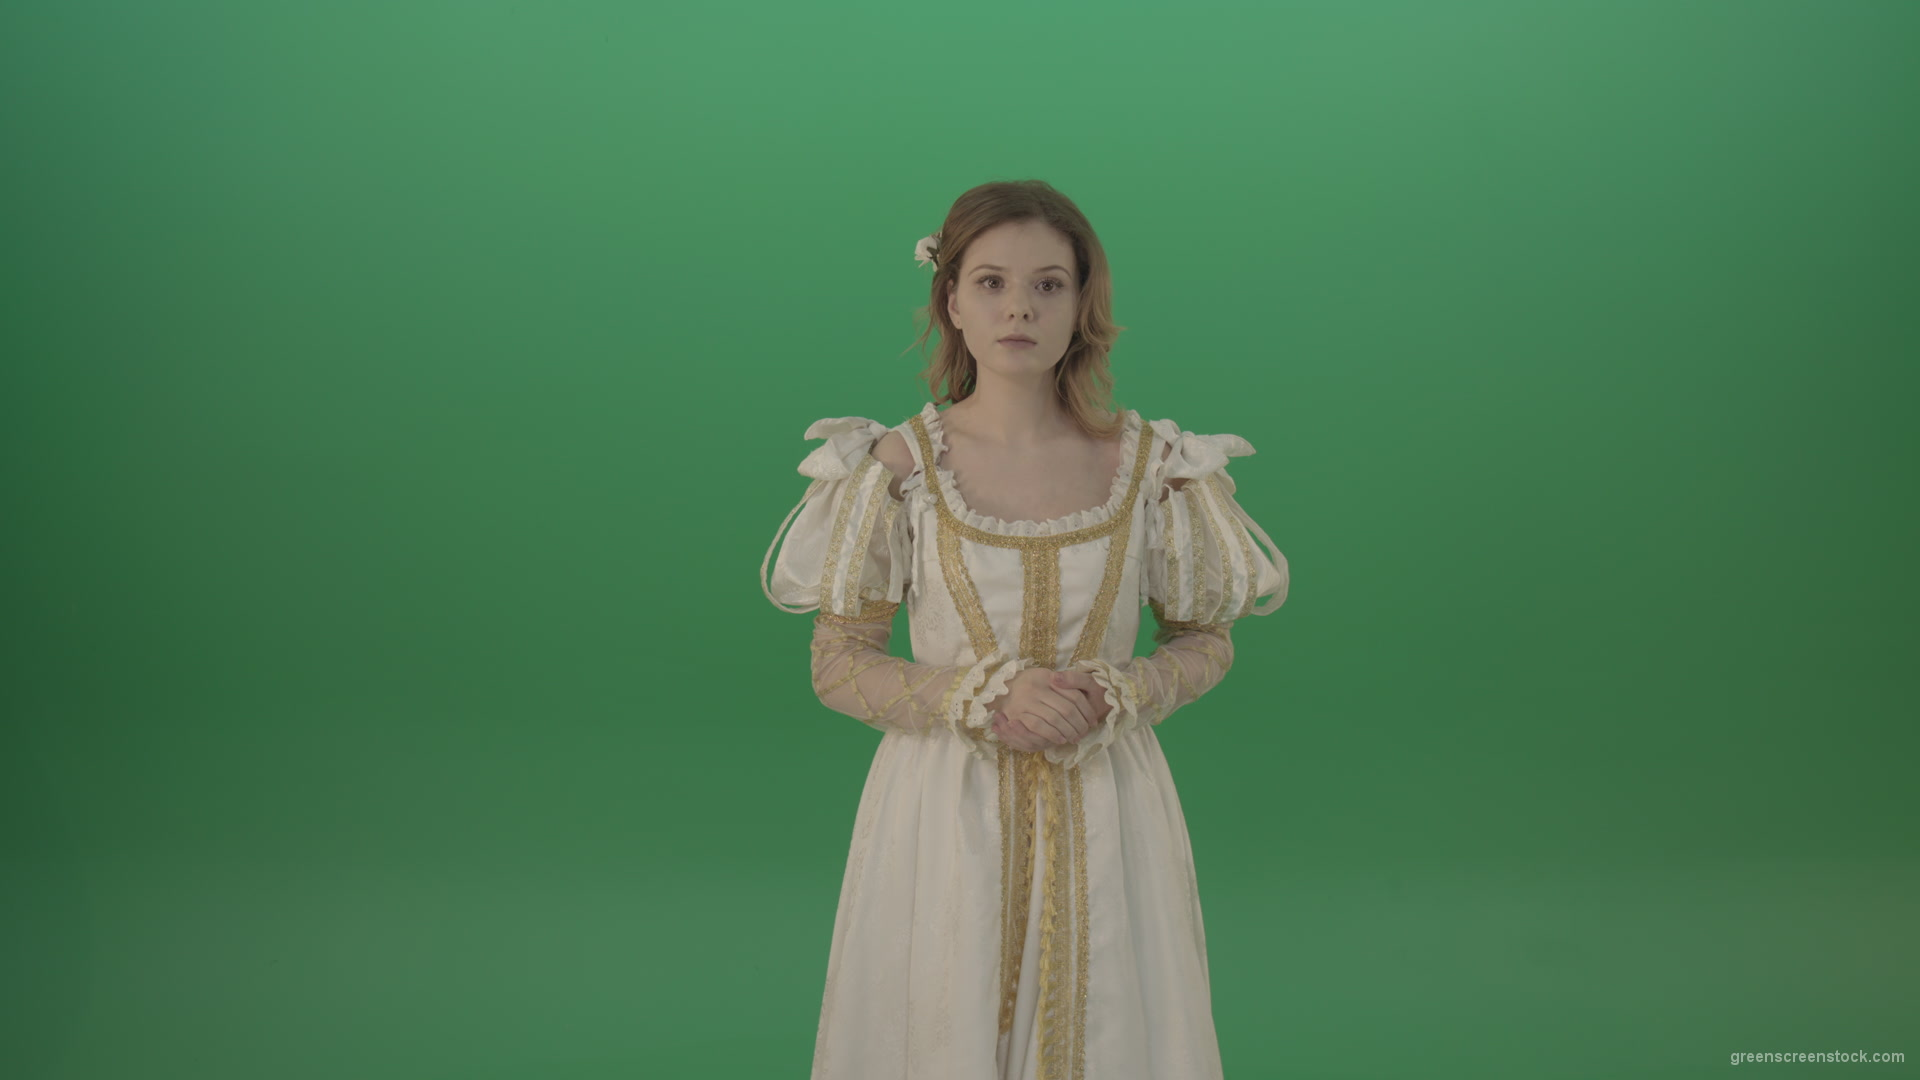 Girl-asks-to-be-quieter-in-a-white-dress-isolated-on-green-screen_001 Green Screen Stock